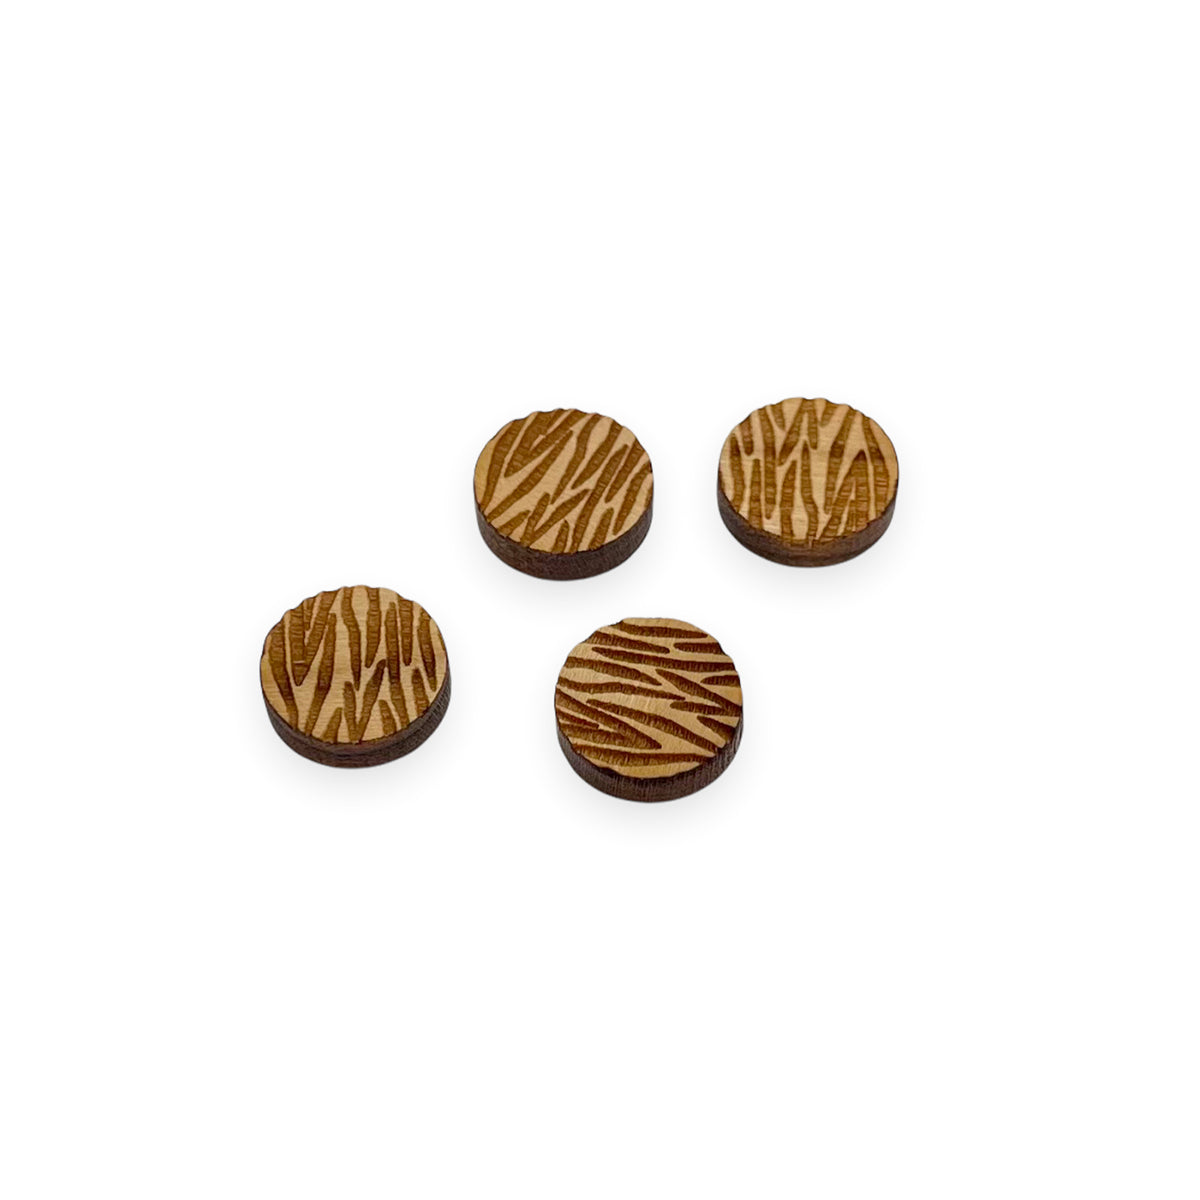 a pair of round shaped wooden cabochon stud earring blanks engraved with zebra print